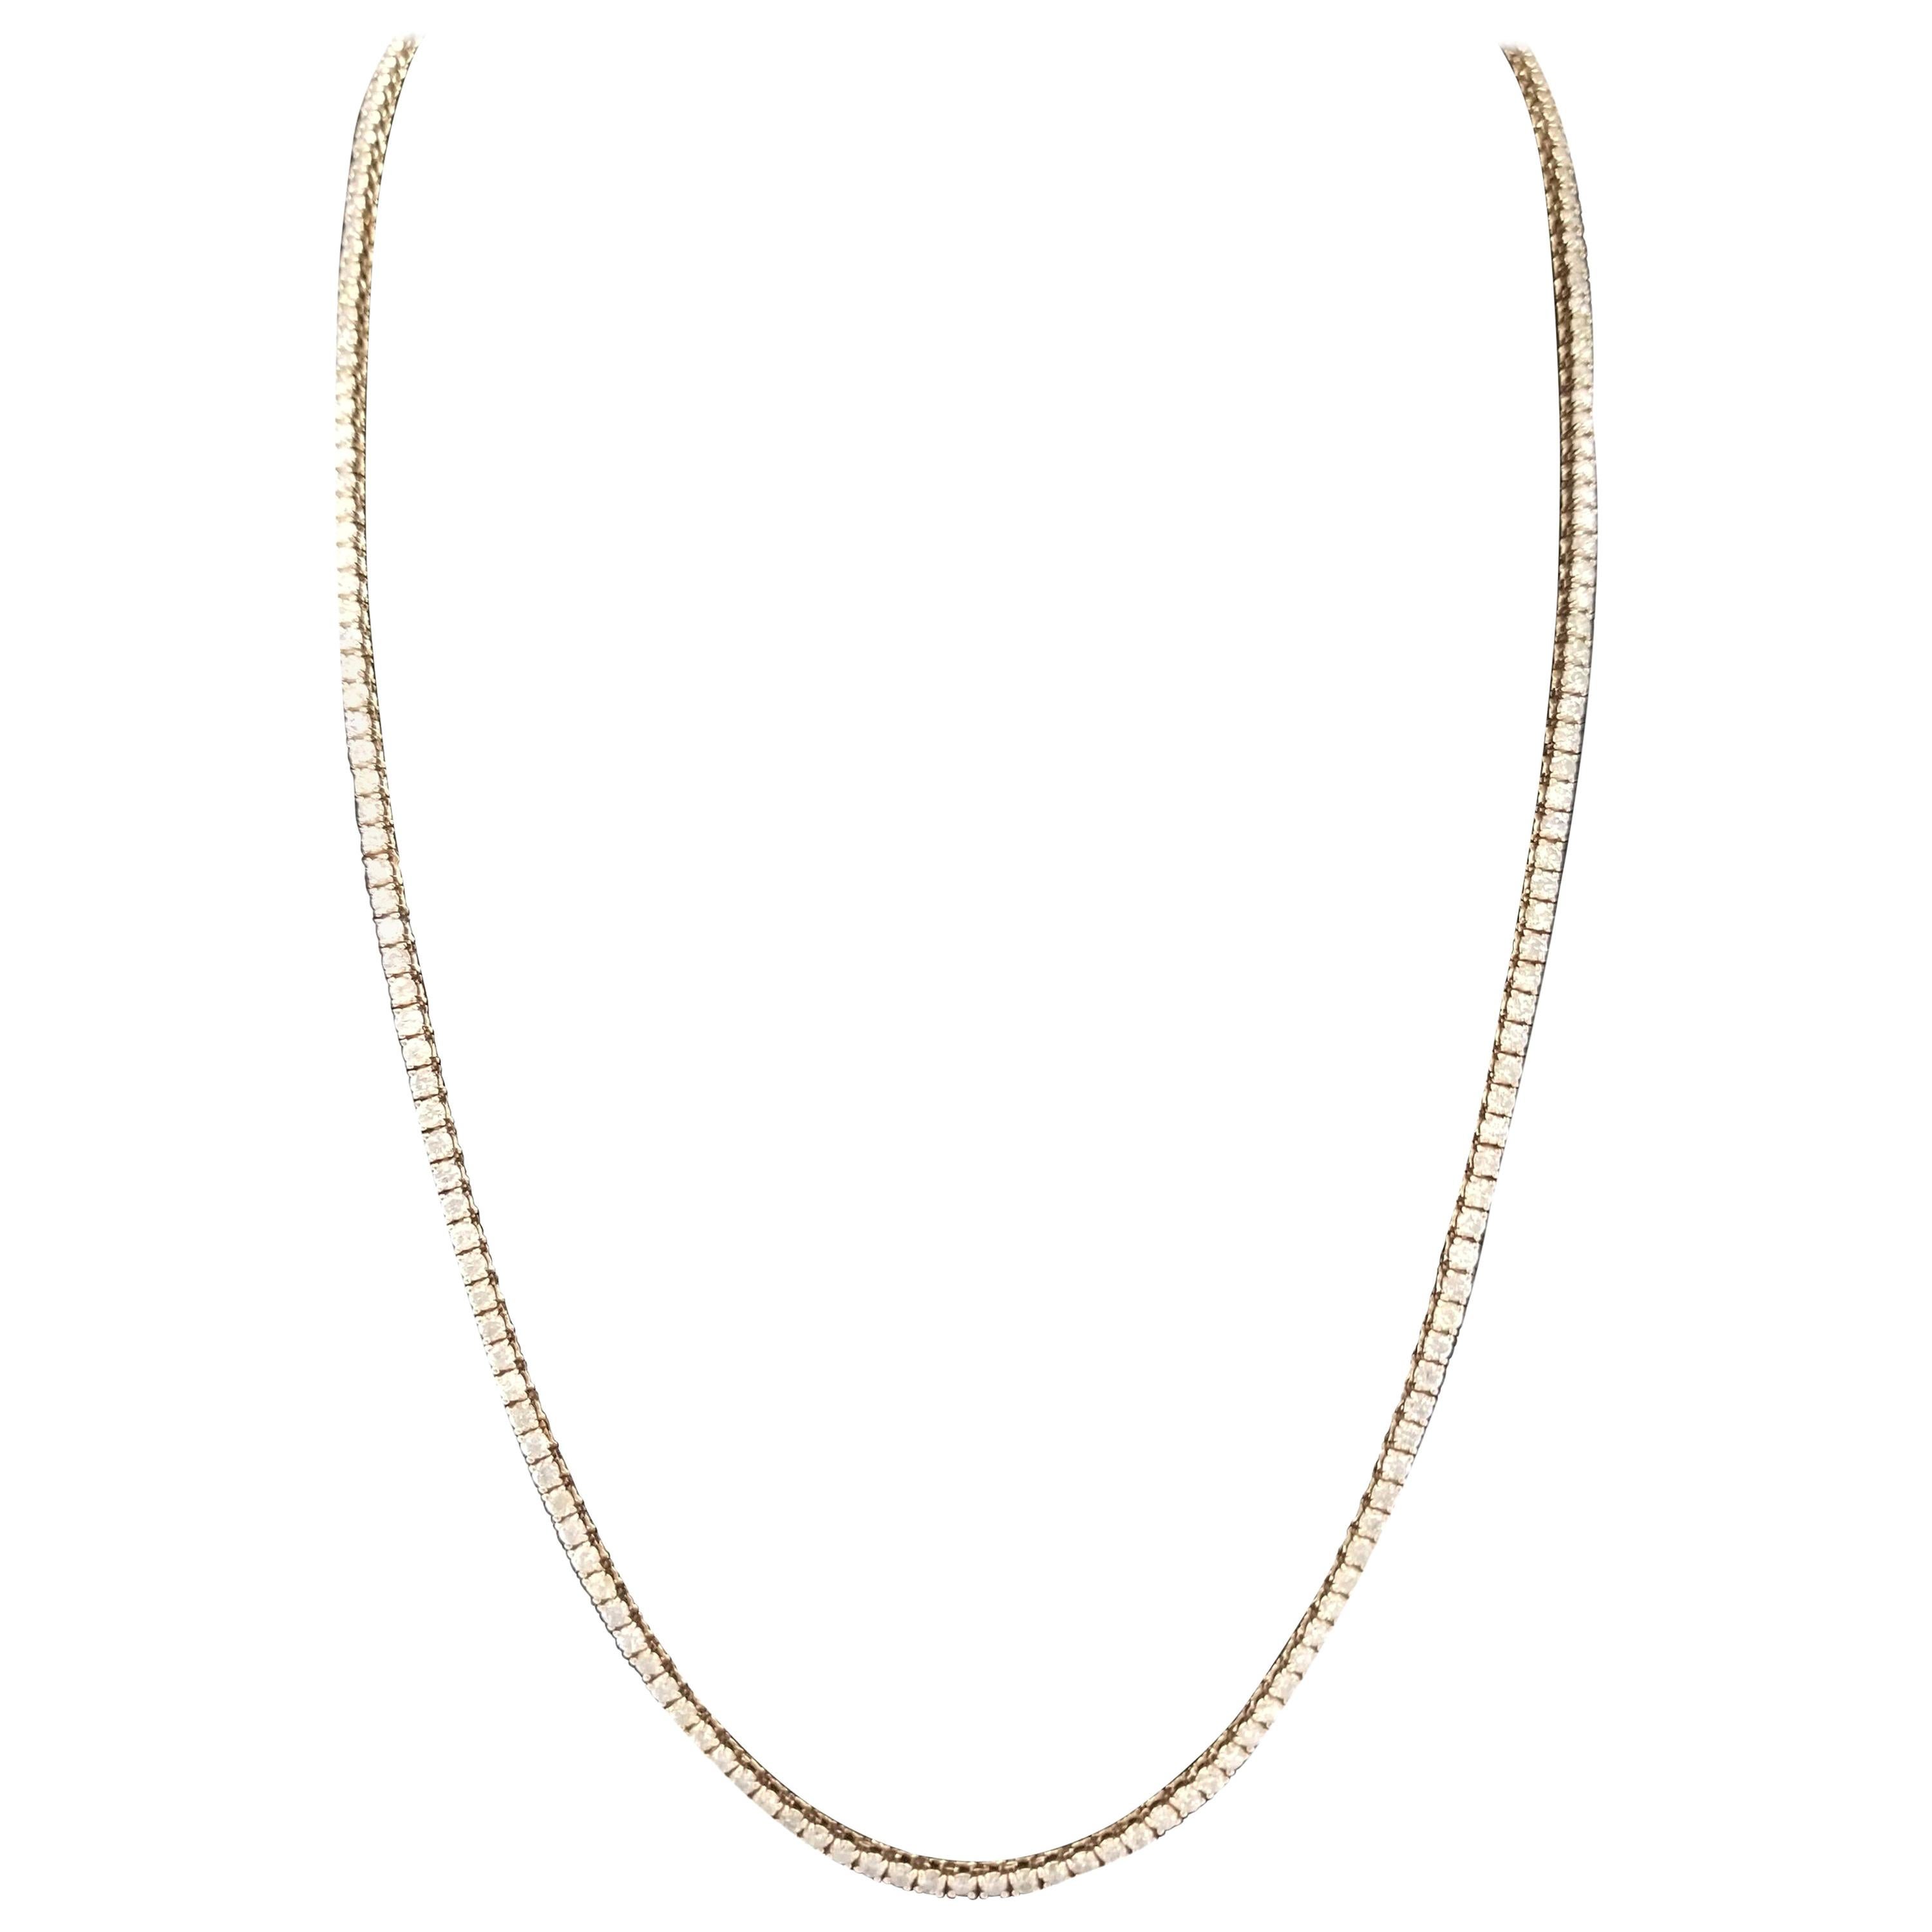 Elegantly simple 14 Karat Yellow Gold Round Brilliant Cut Diamond Tennis Necklace set on 4 prong setting. The total diamond weight is 4.30 carats. The closure is an insert clasp with safety clasp. Length is 18 inches. Average Color I, Clarity SI.